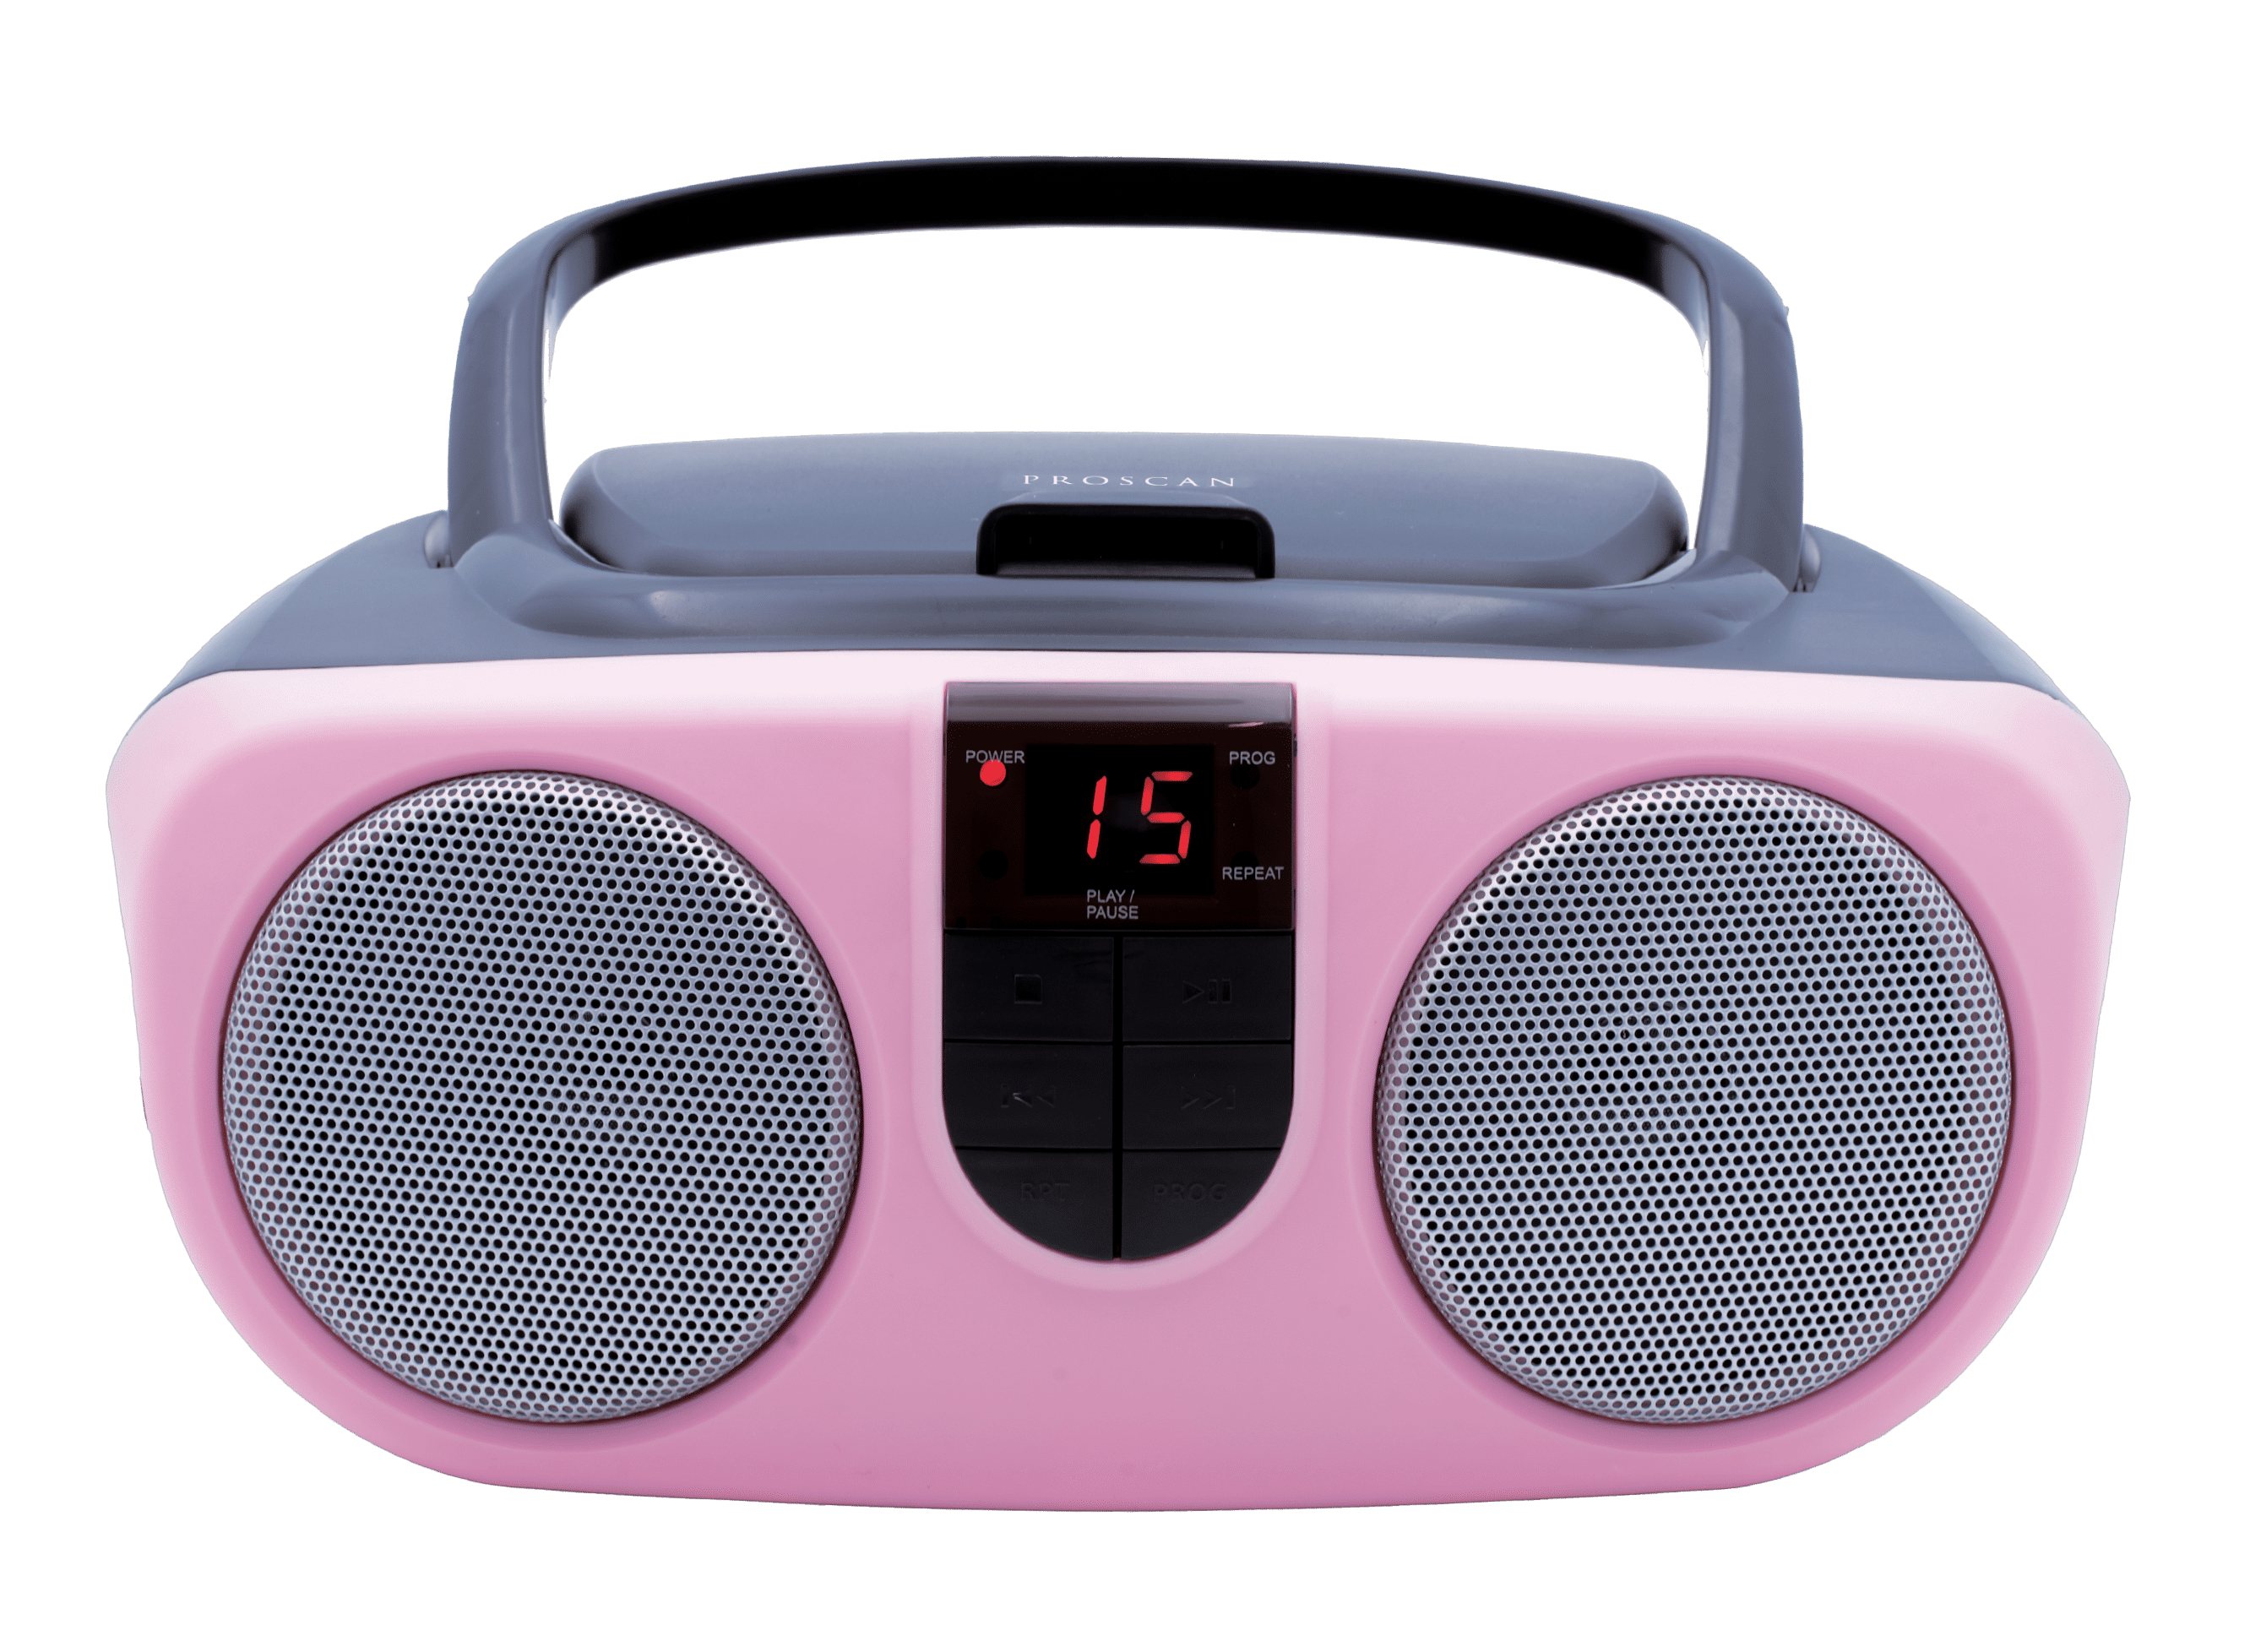 hPlay Gummy GC04B Portable CD Player Boombox with Digital Tunning FM Stereo  Radio Kids CD Player Bluetooth USB LCD Display, Front Aux-in Port and  Headphone Jack, Supported AC or Battery Powered- Pink 